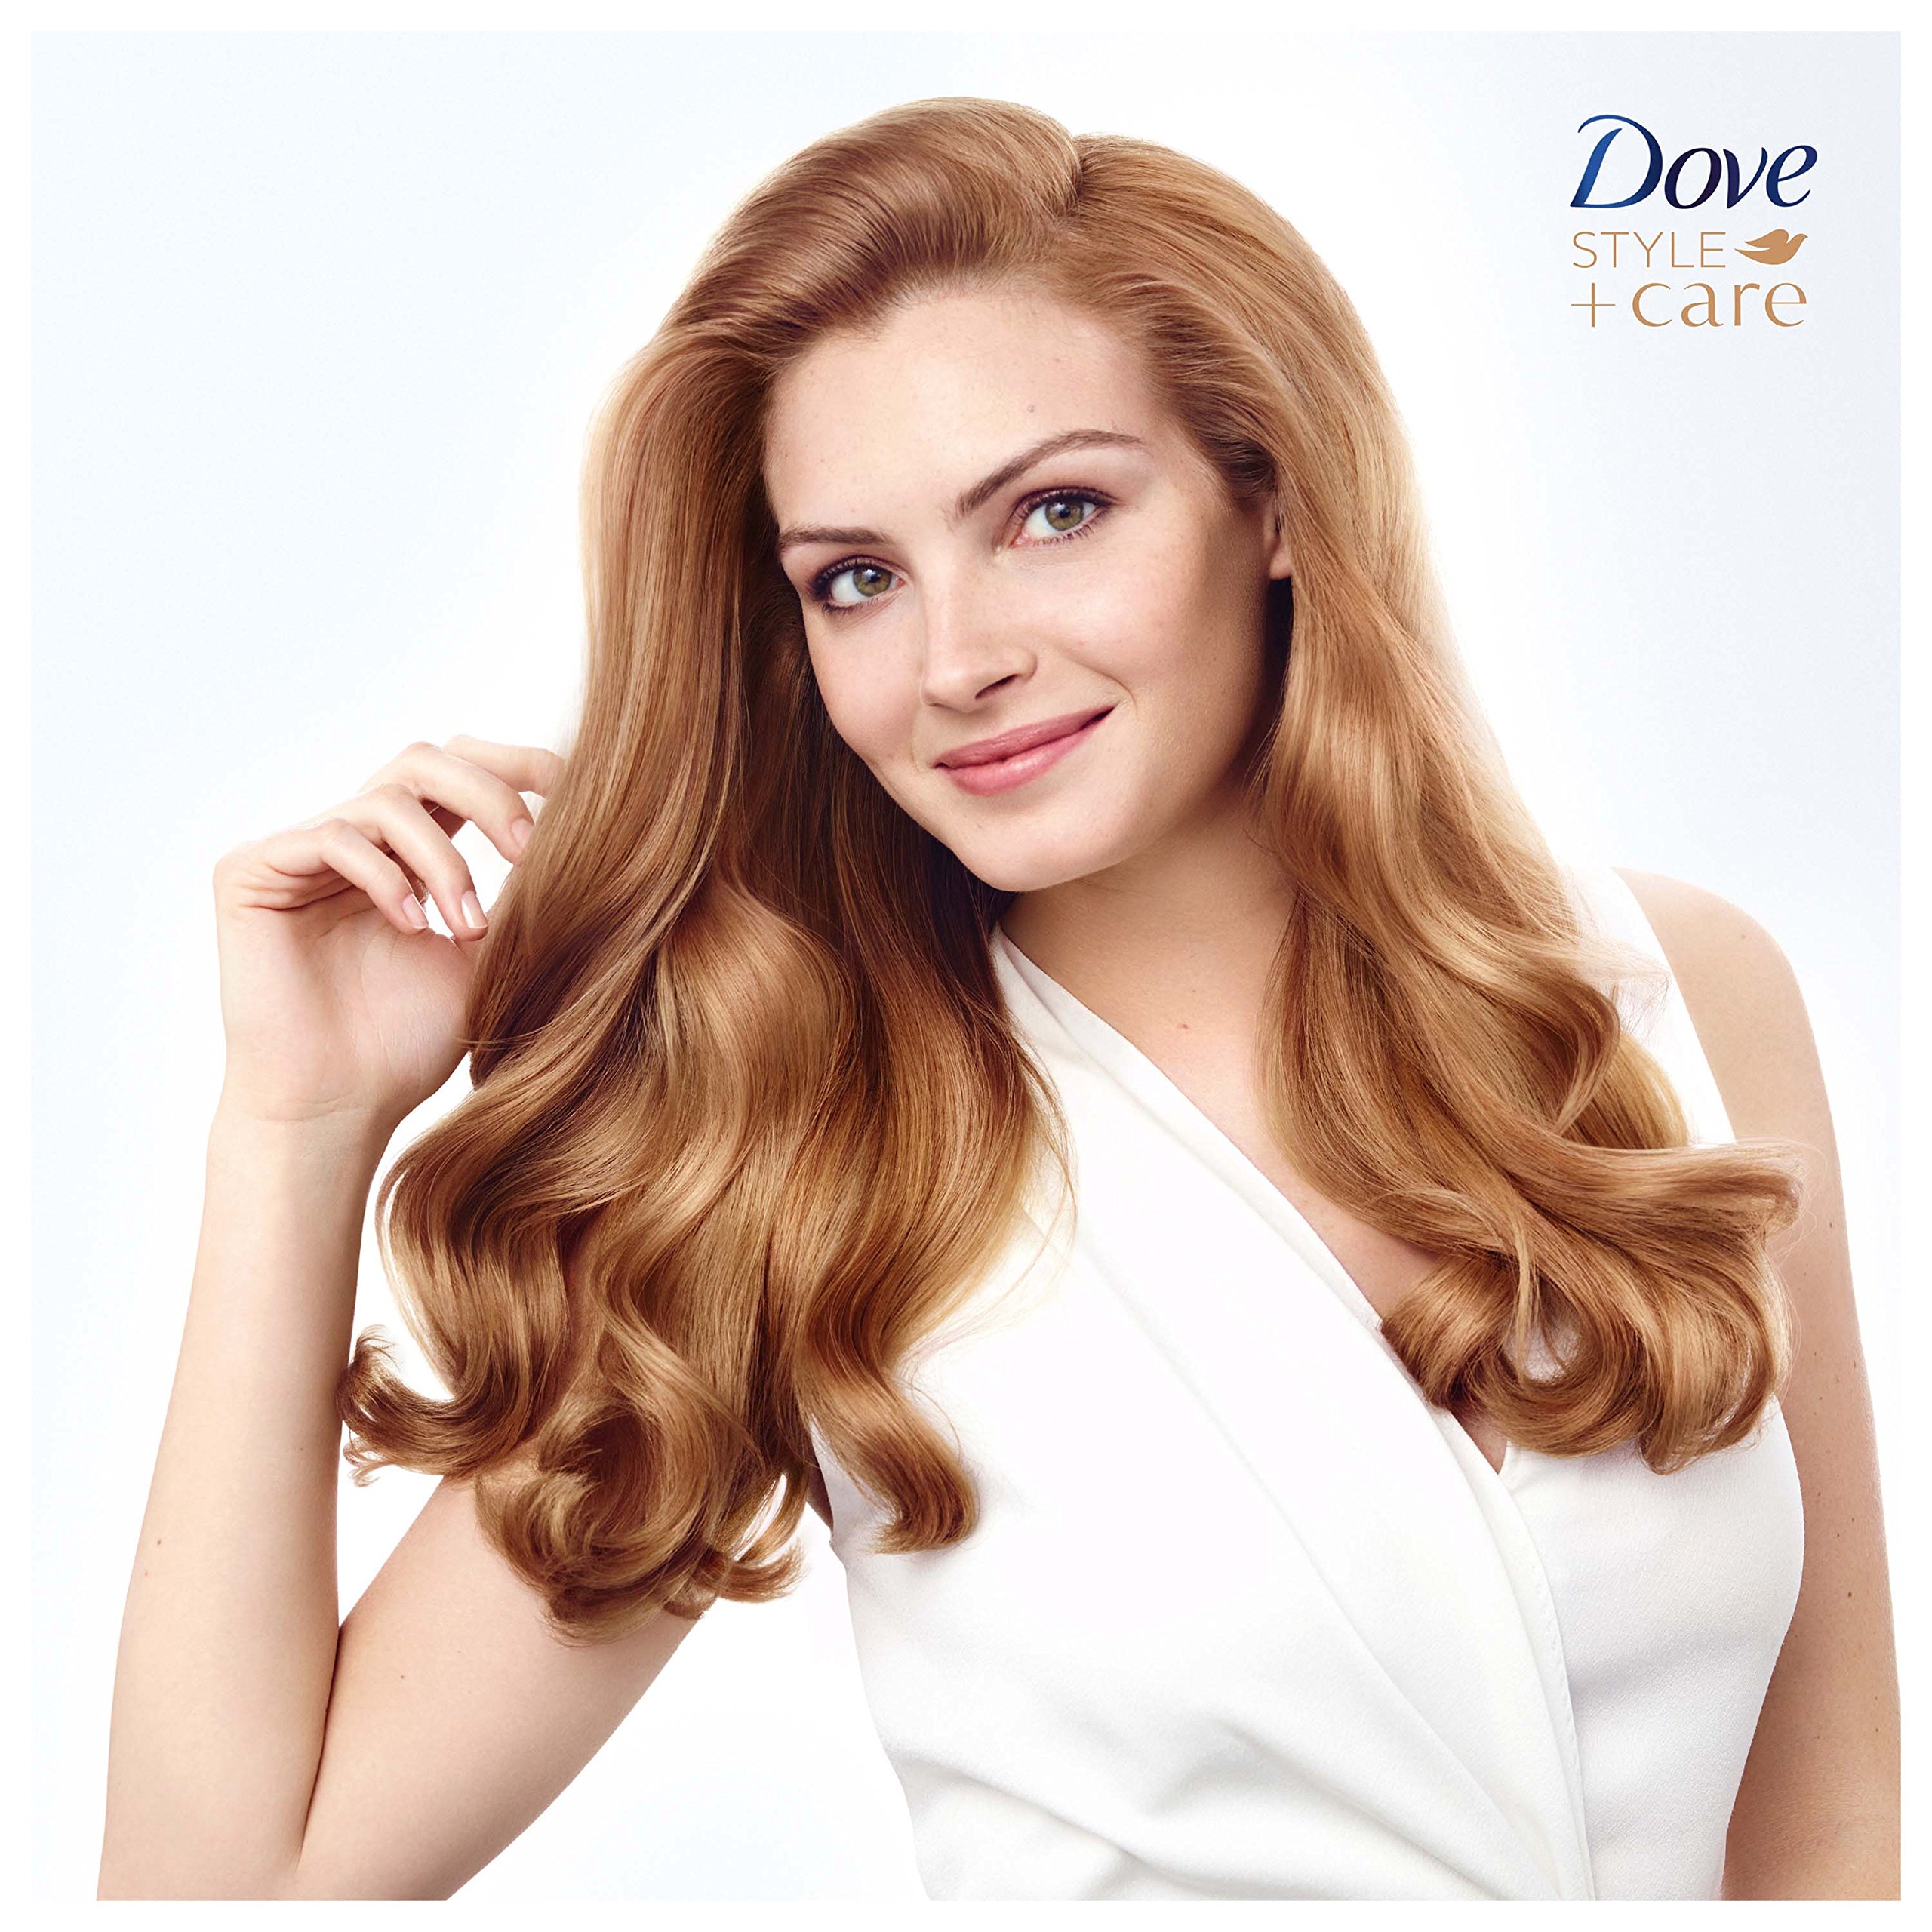 Dove STYLE+care Curls Defining Mousse, Soft Hold 7 oz